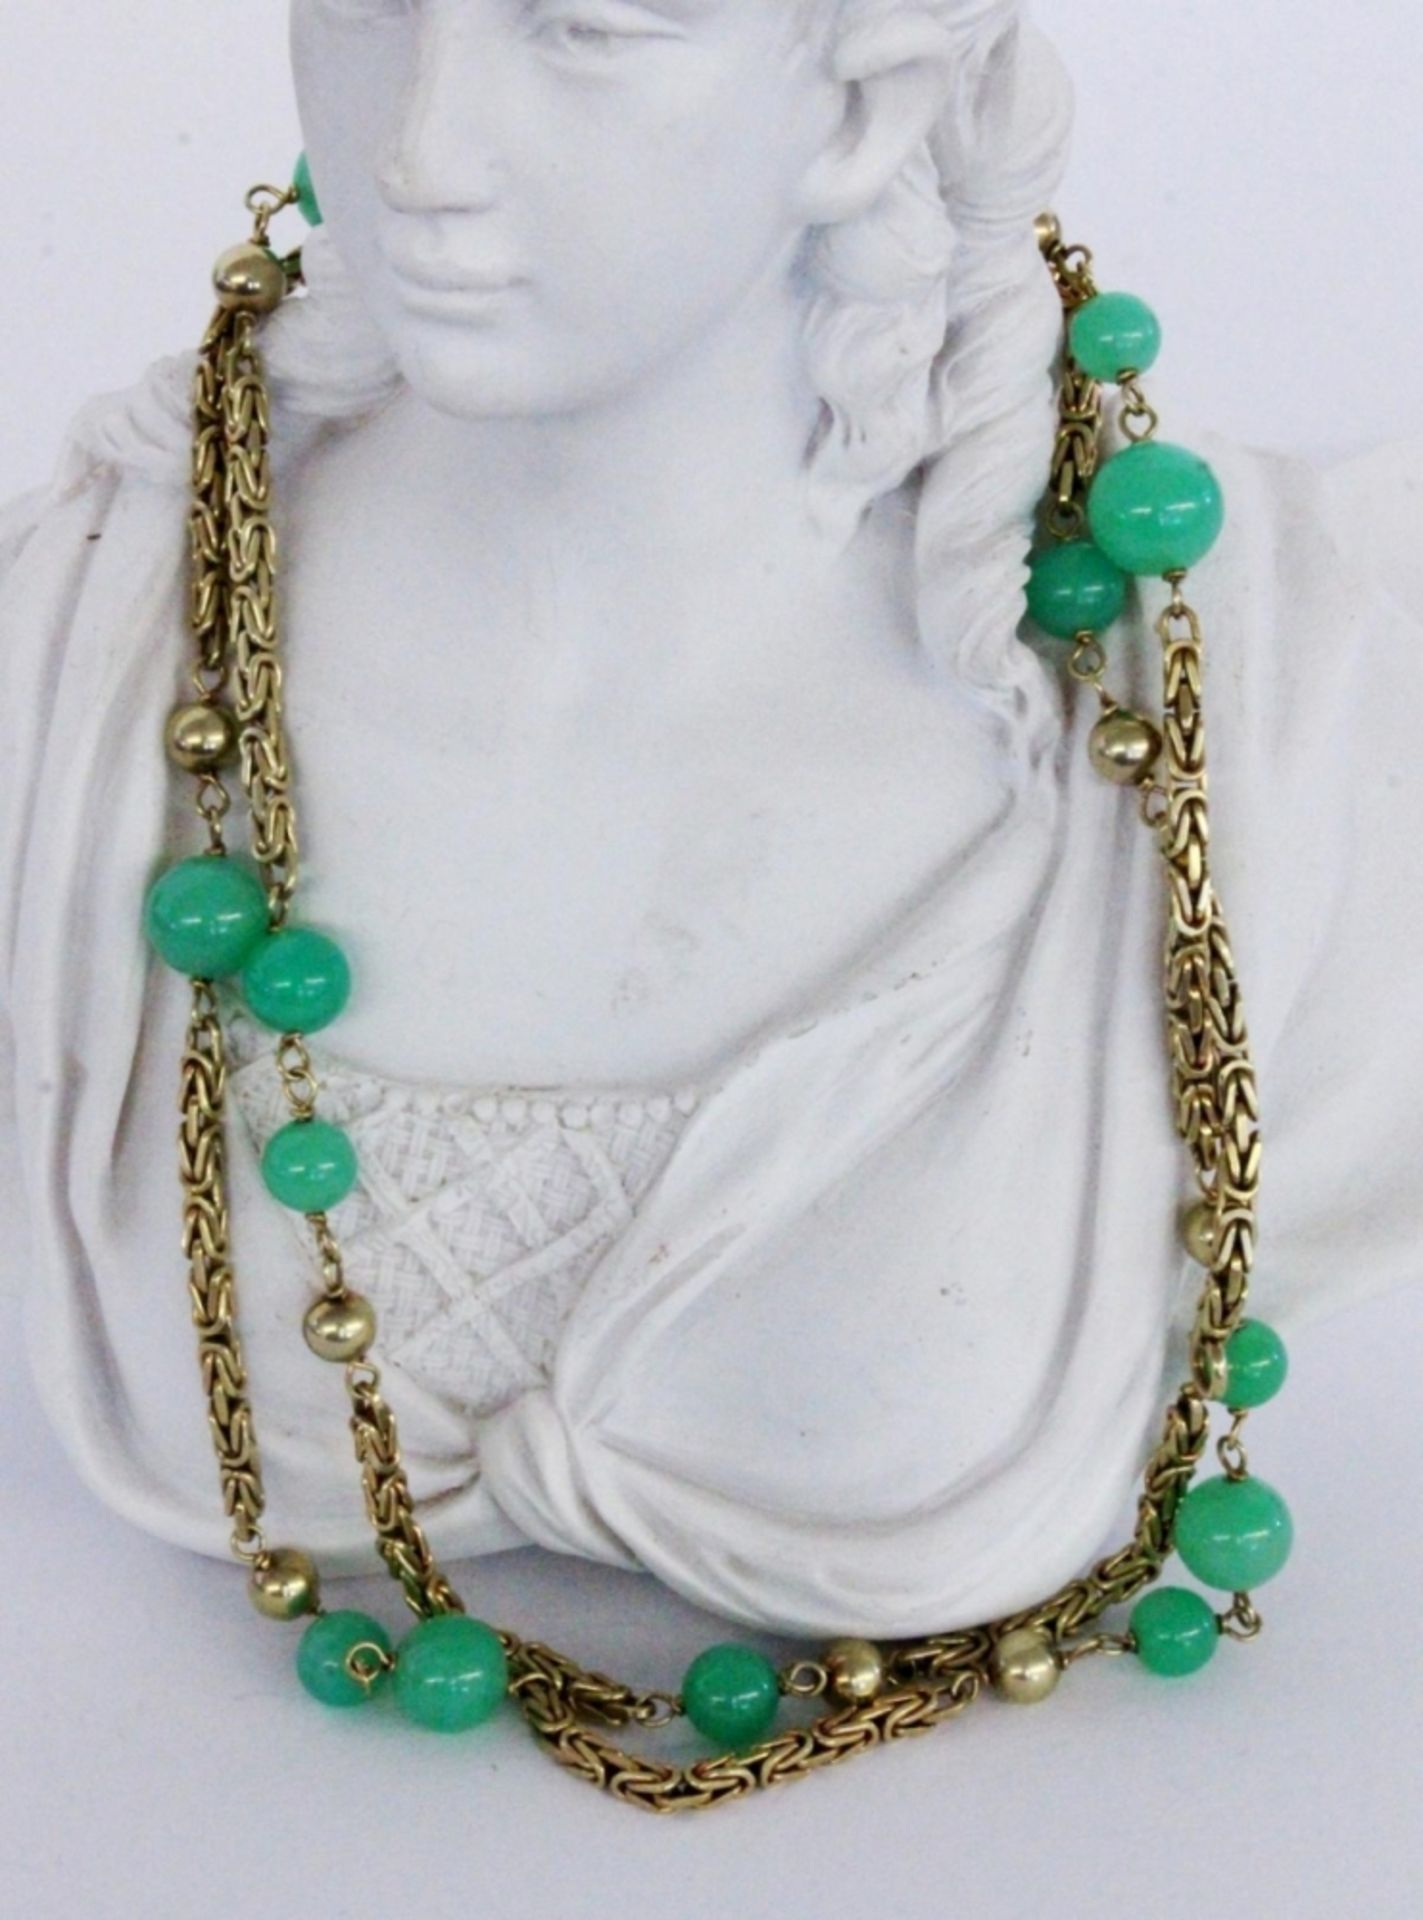 A BYZANTINE CHAIN 585/000 yellow gold with interlinks in gold and chrysoprase. 77.5 cm